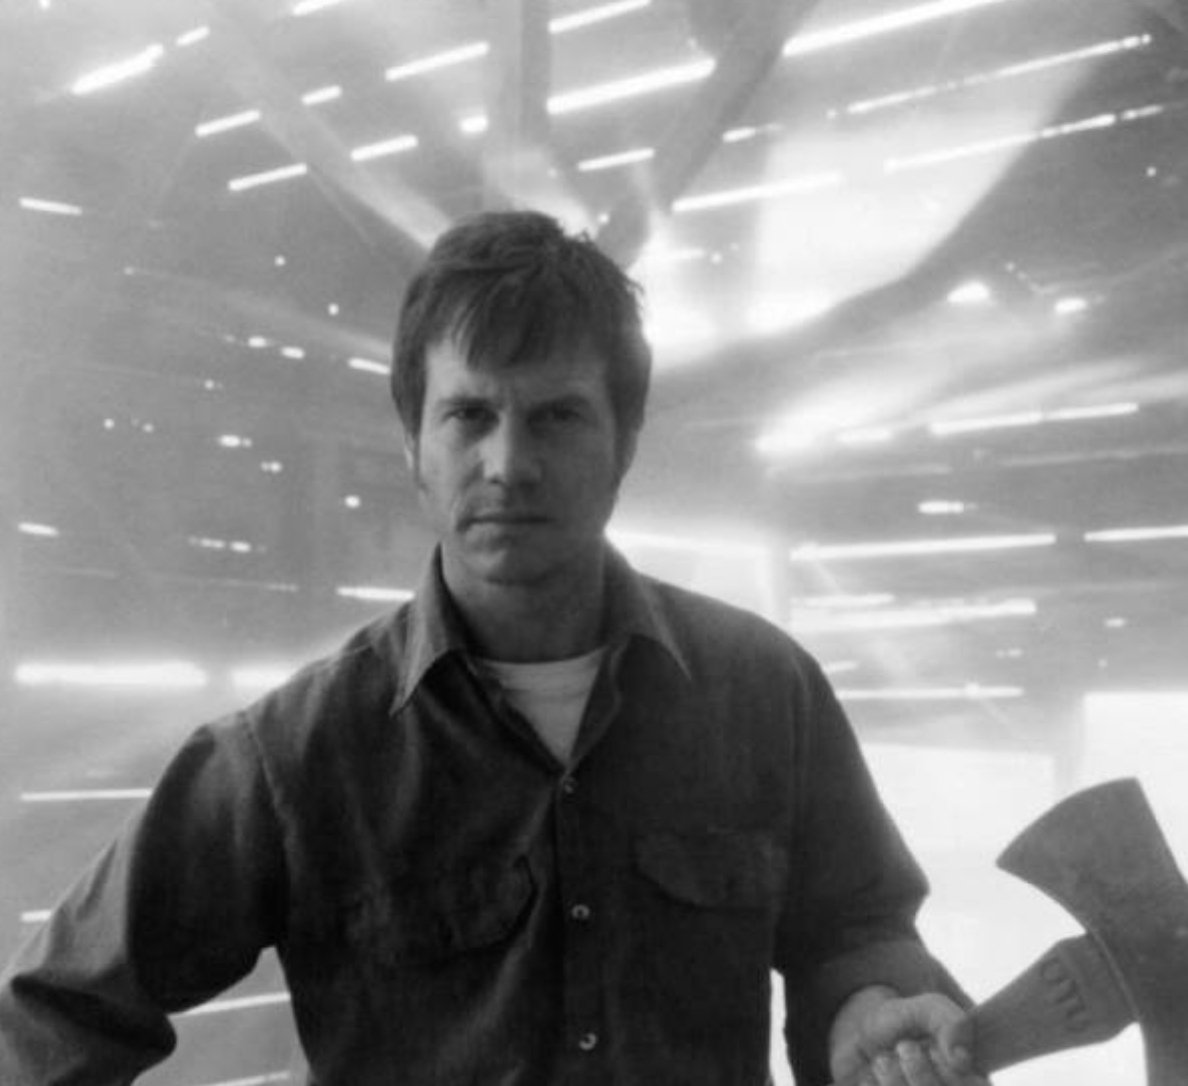 Happy birthday Bill Paxton RIP I will always remember your great performances and talent. 